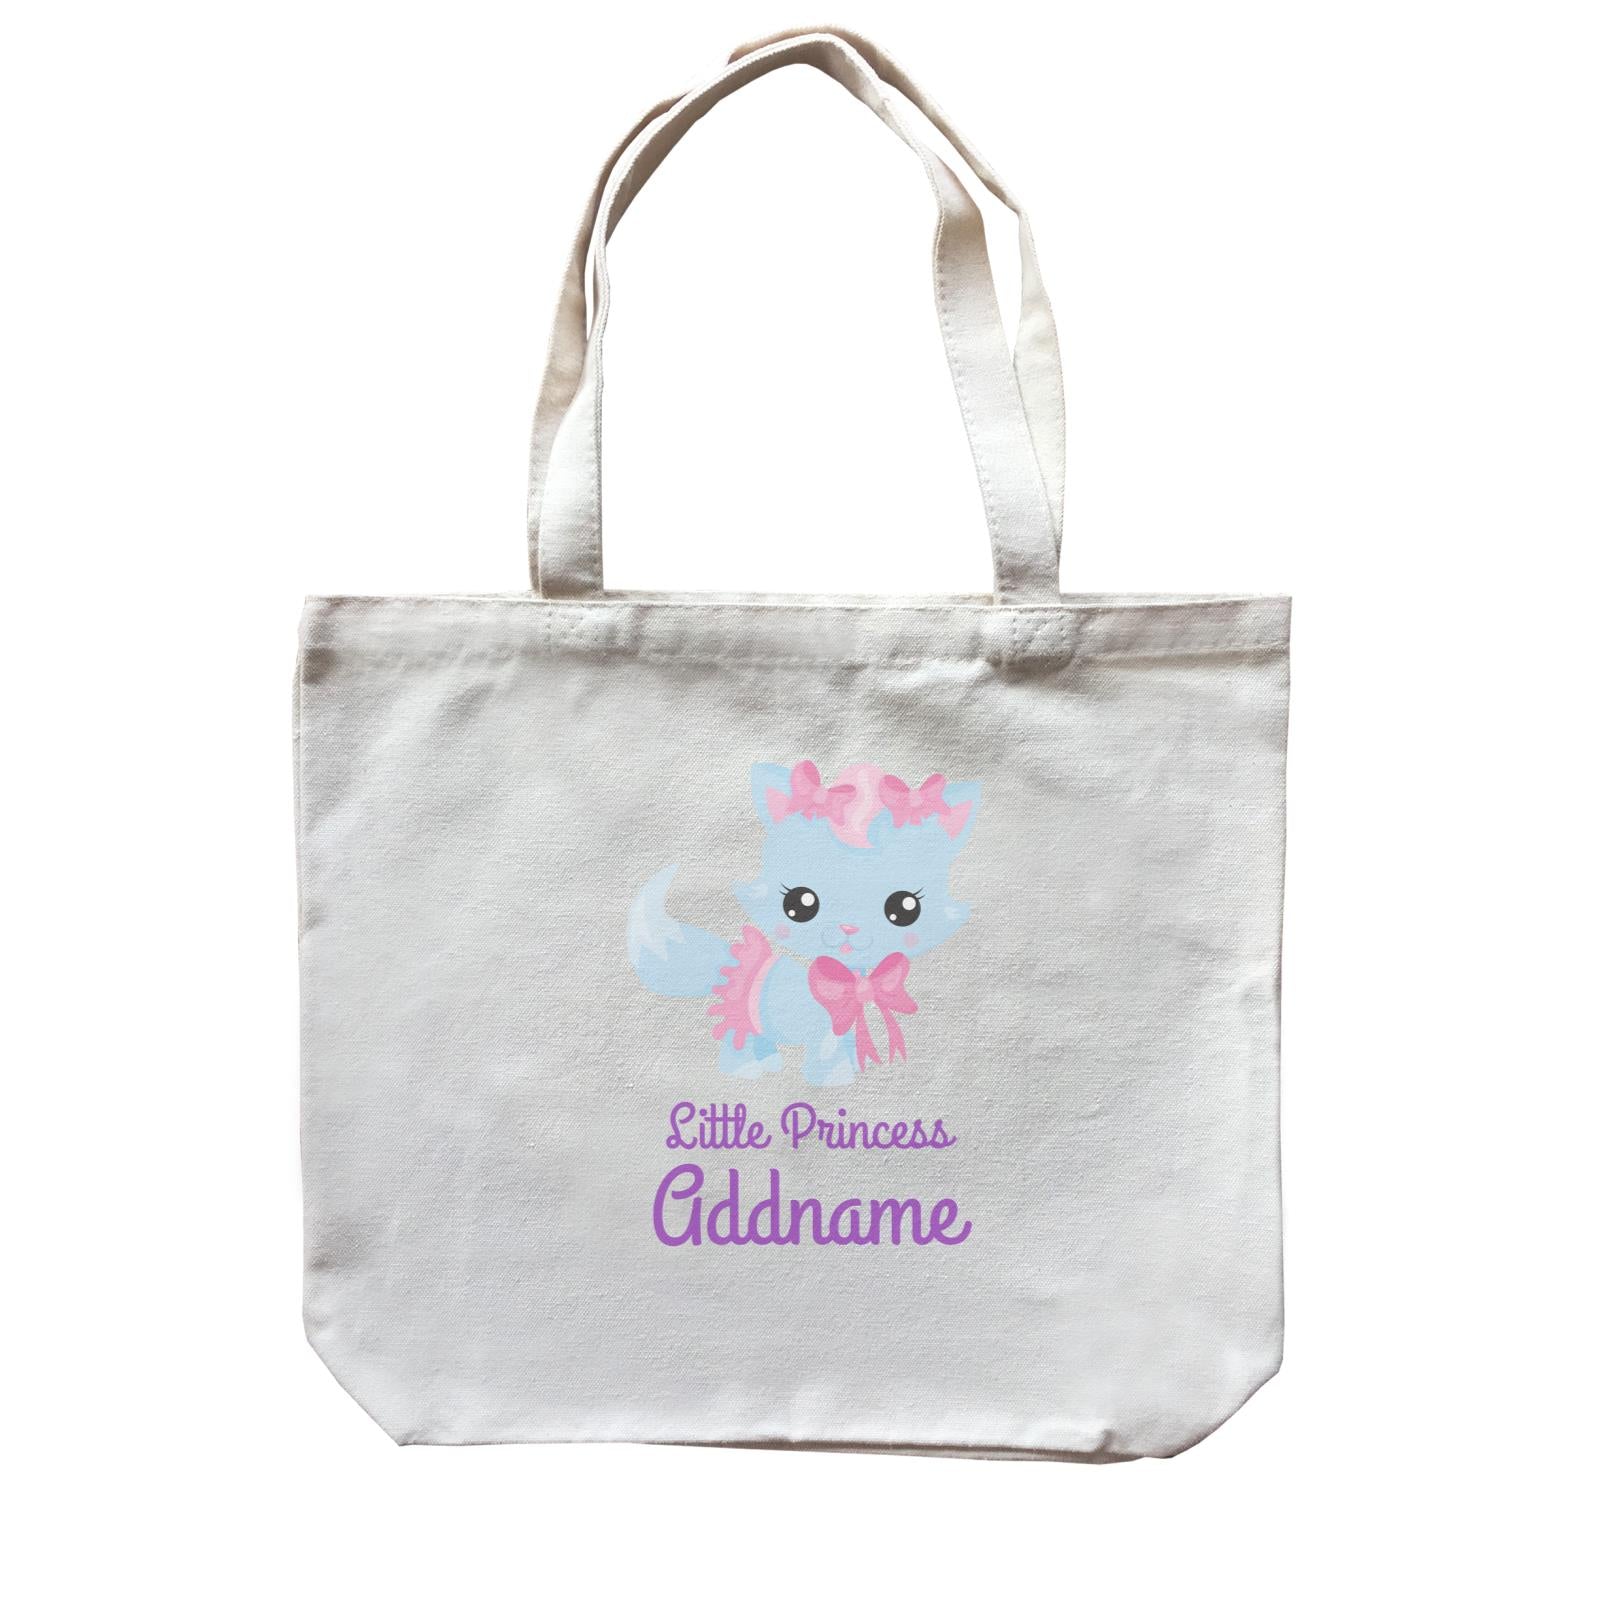 Little Princess Pets Blue Cat with Pink Ribbons Addname Canvas Bag